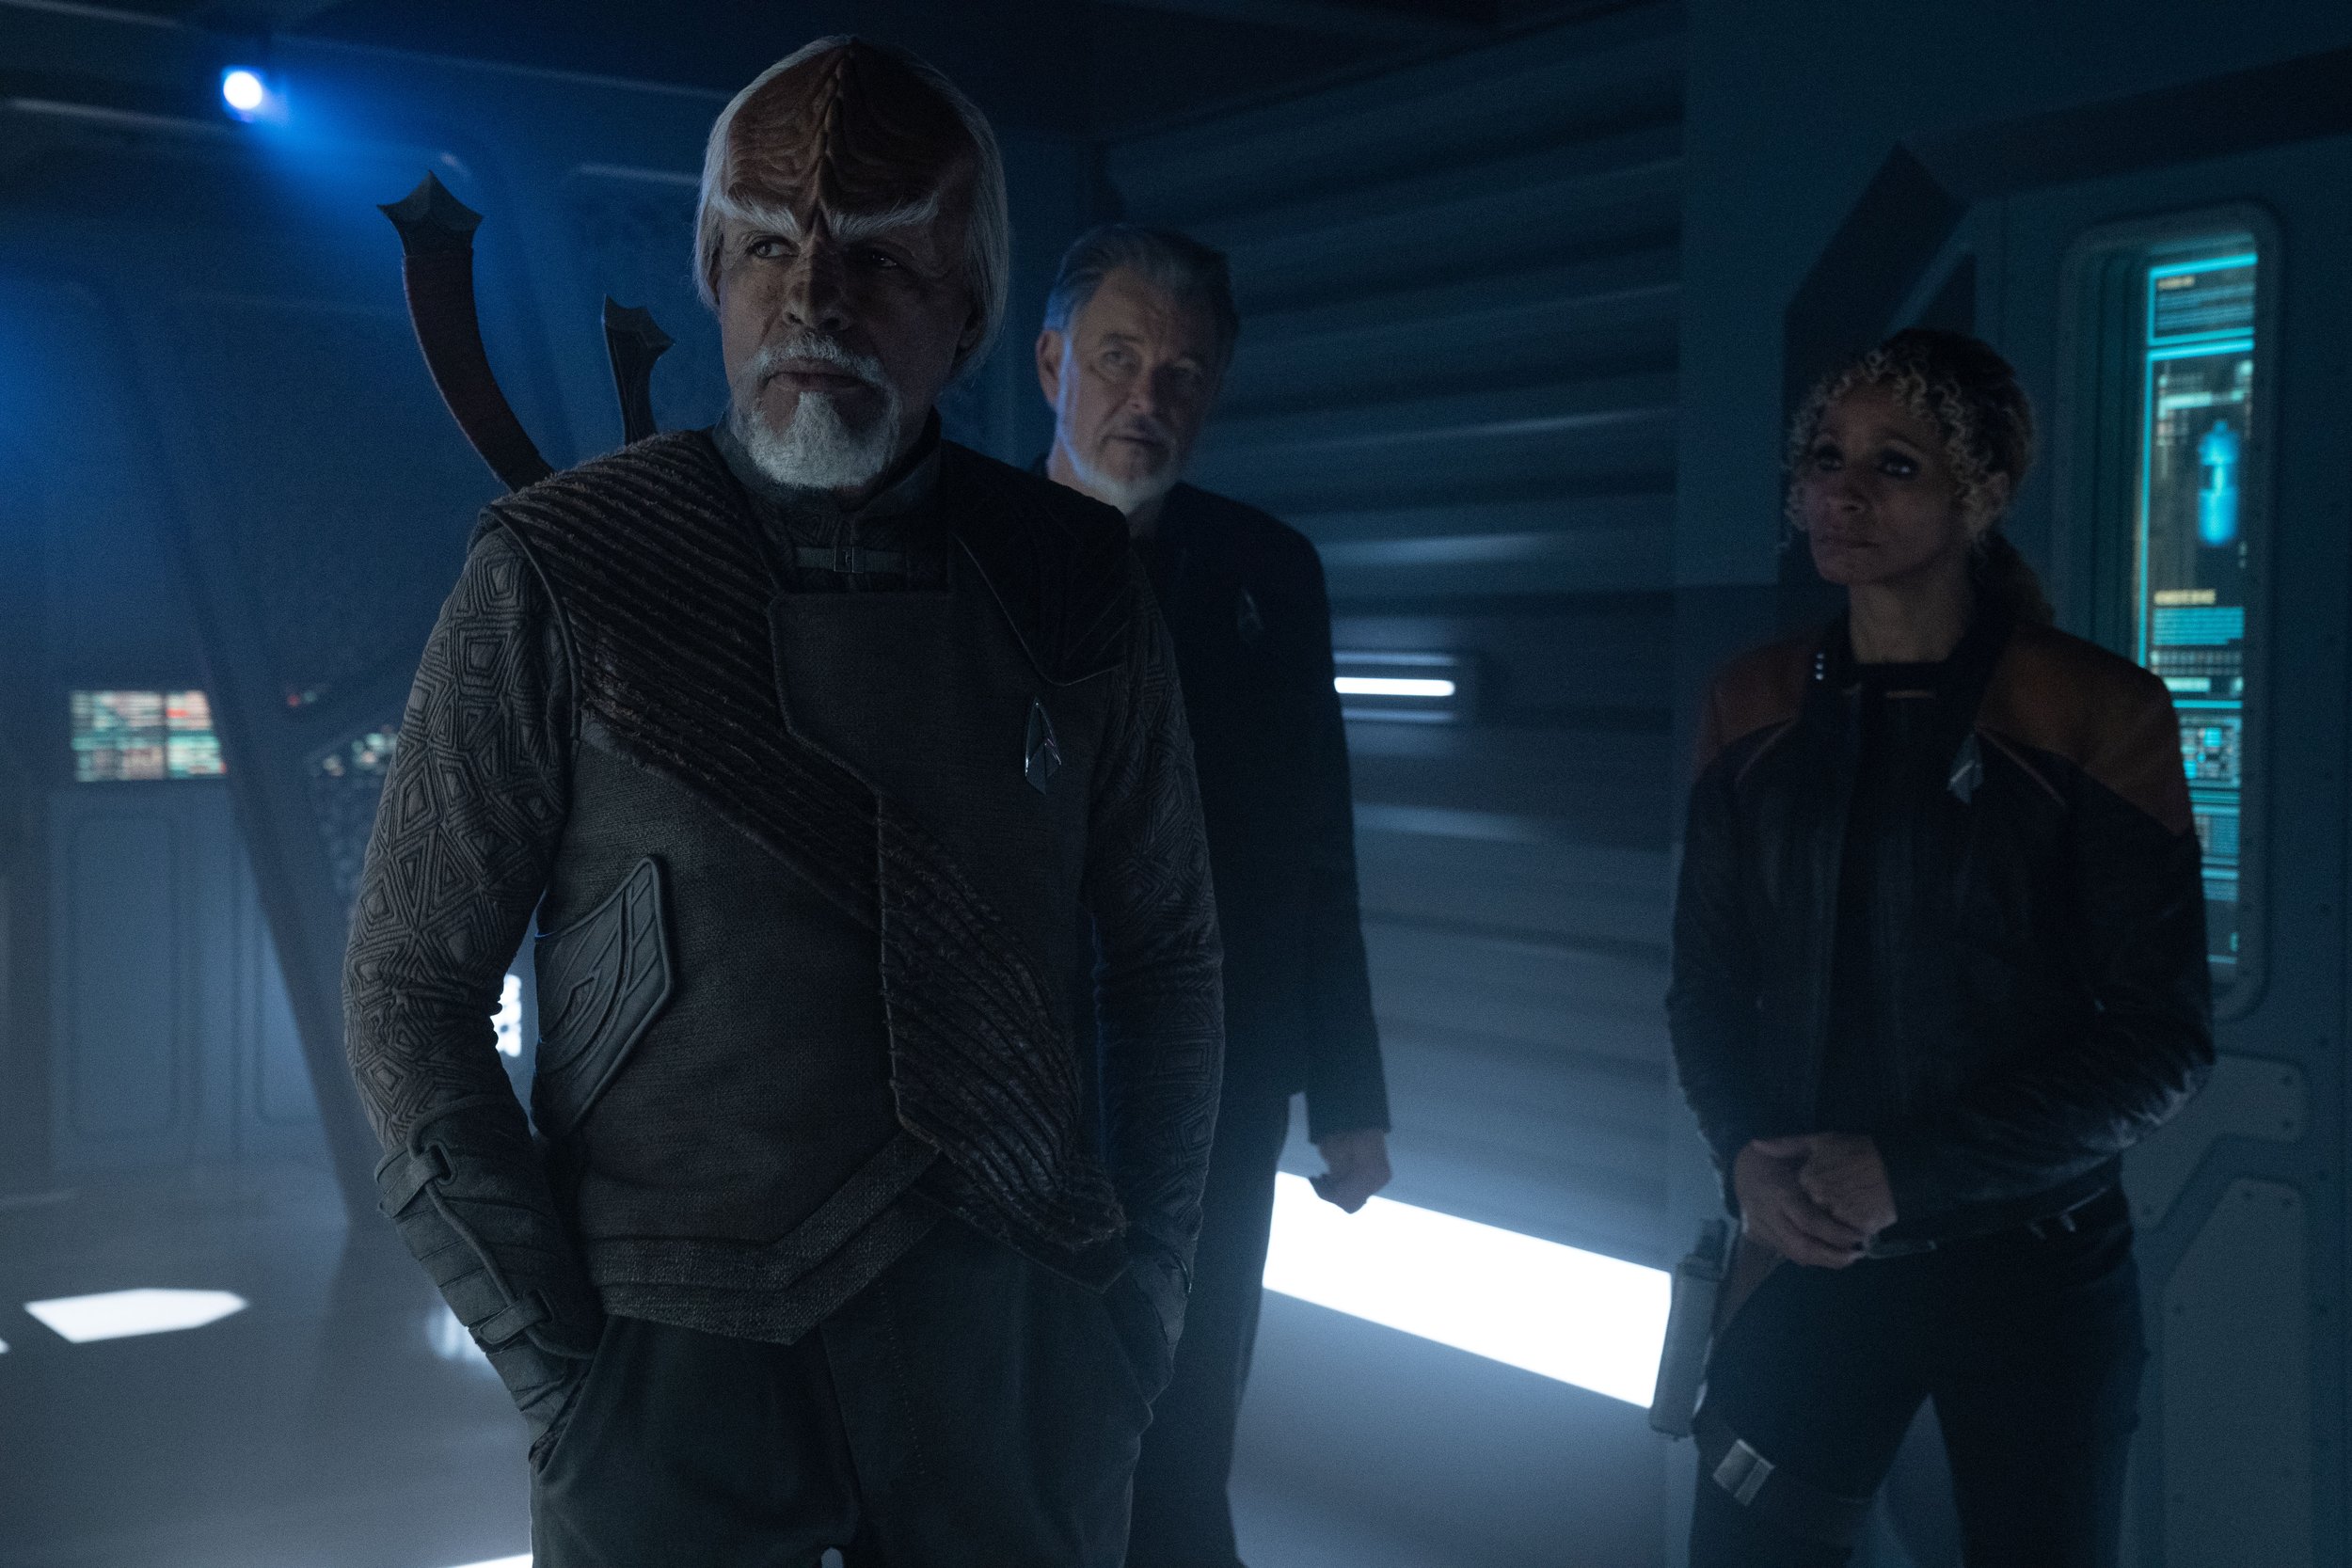   Michelle Hurd  as Raffi Musiker,  Jonathan Frake s as Will Riker and  Michael Dorn  as Worf.  Photo Credit: Trae Patton/Paramount+.  